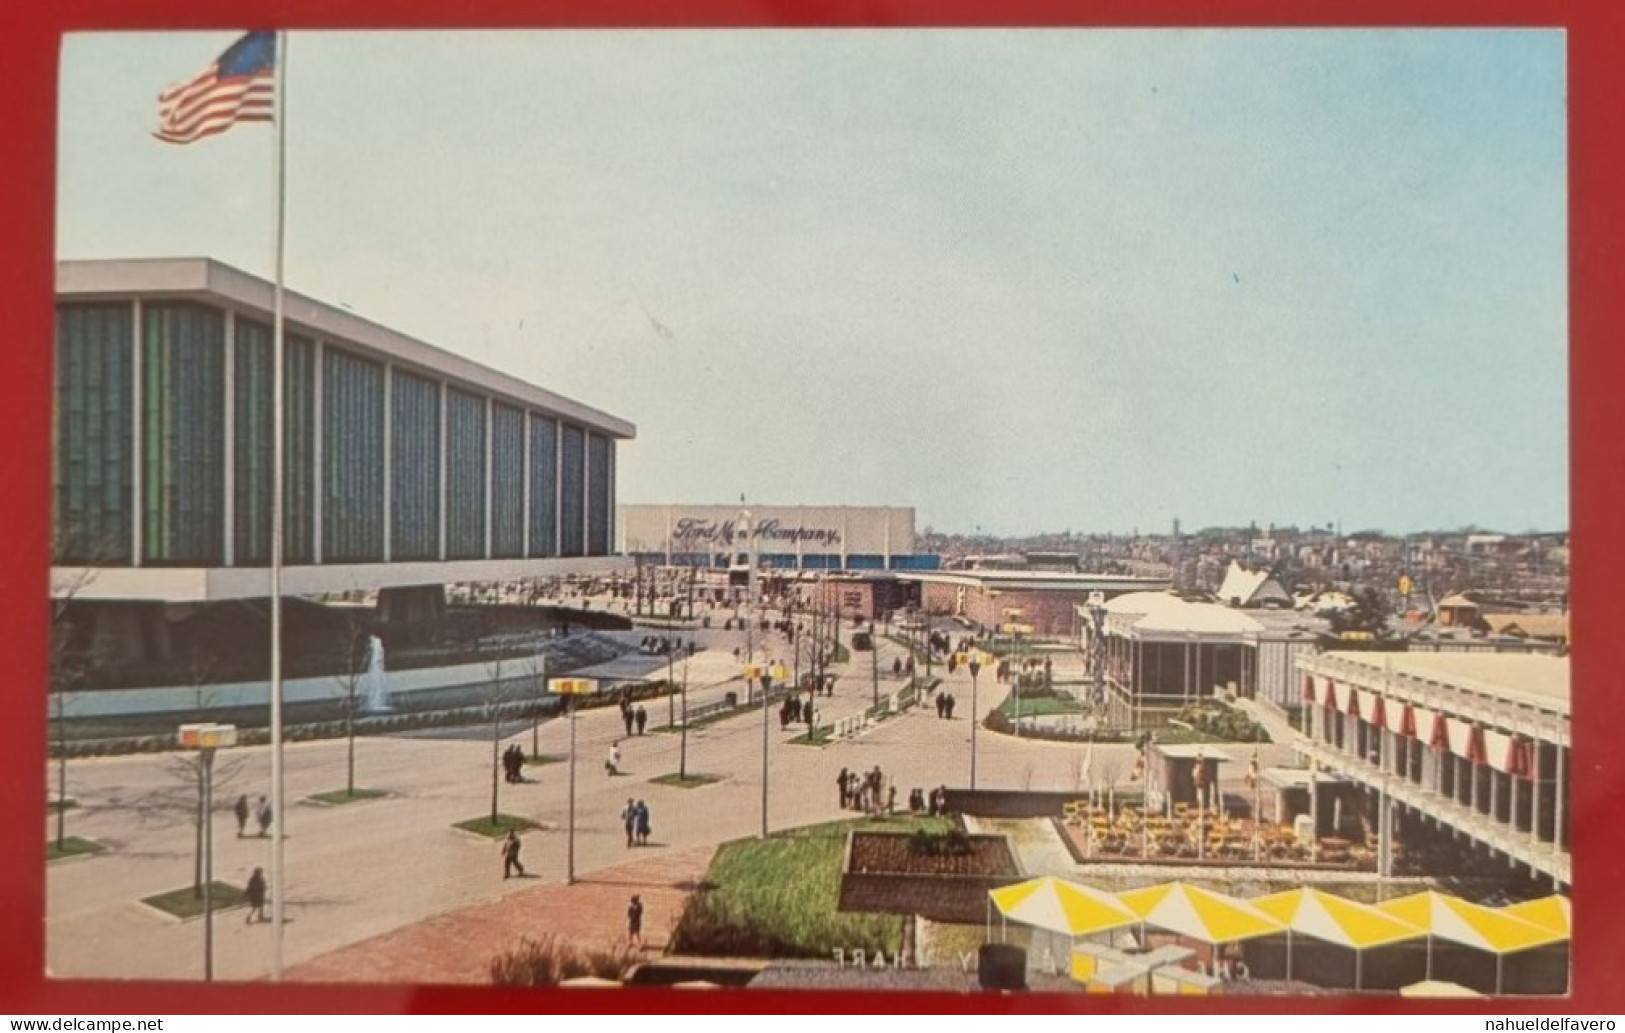 Uncirculated Postcard - USA - NY, NEW YORK WORLD'S FAIR 1964-65 - KENNEDY CIRCLE LOOKING SOUTHWEST - Tentoonstellingen